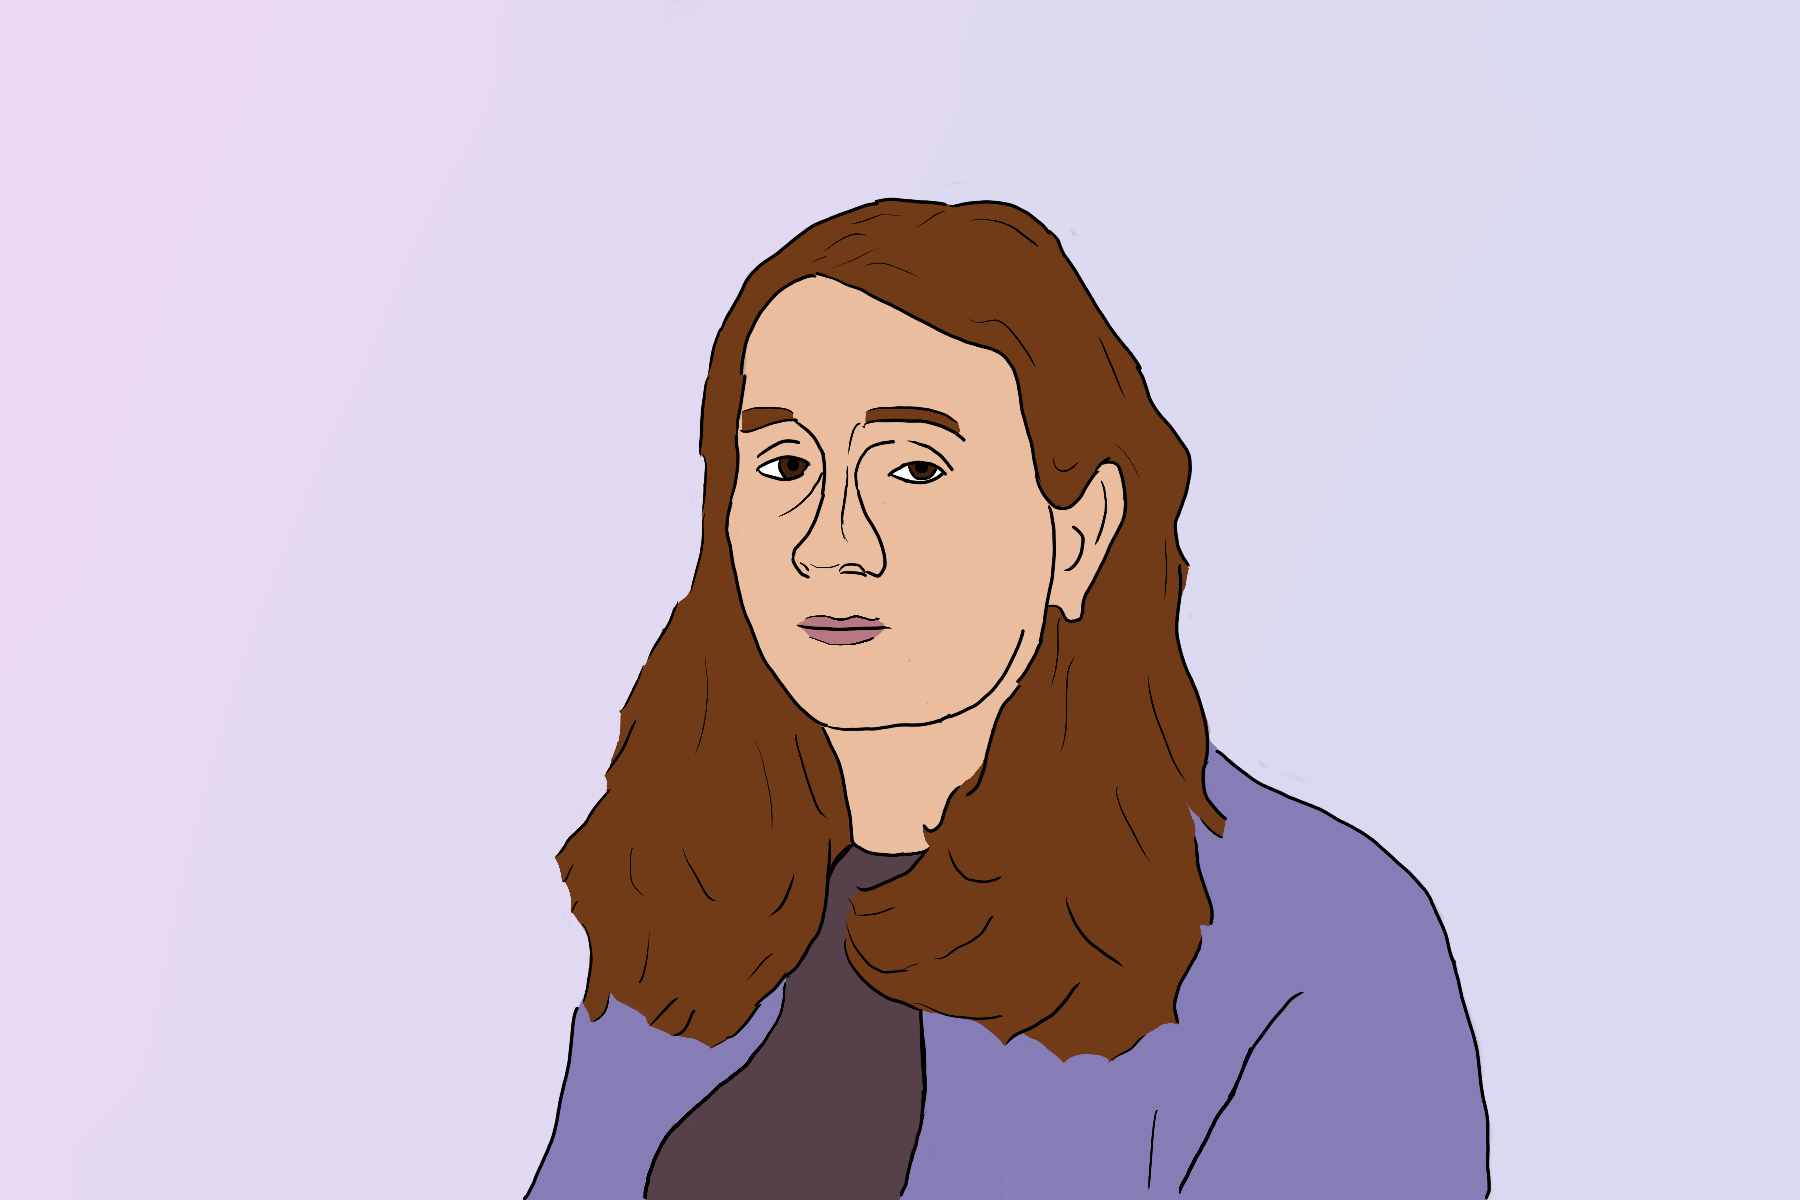 a line and flat colors picture of a white person with long hair